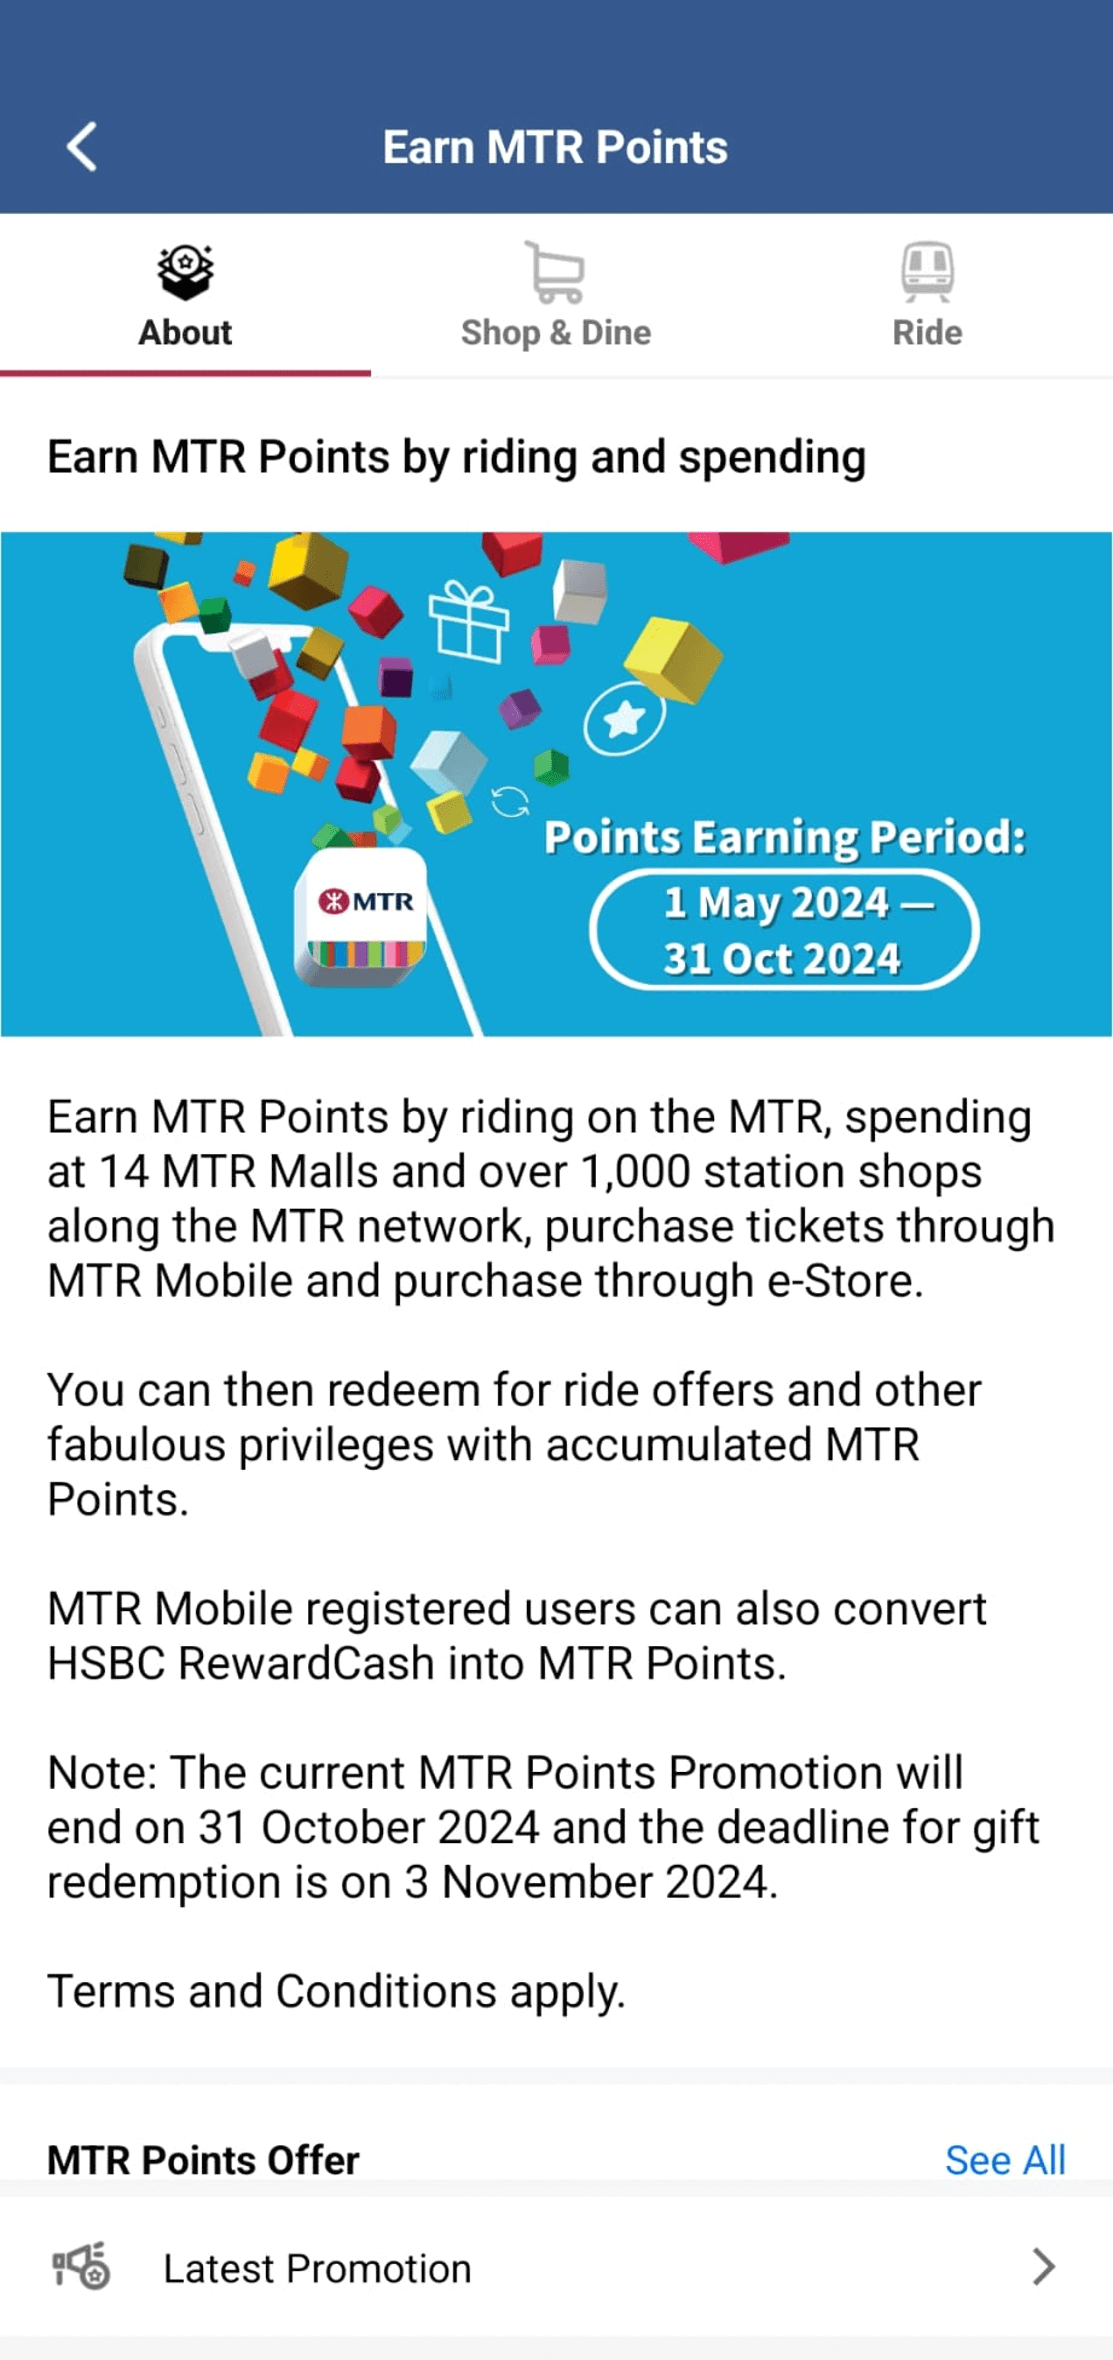 With MTR Mobile, earning MTR Points has never been so easy!